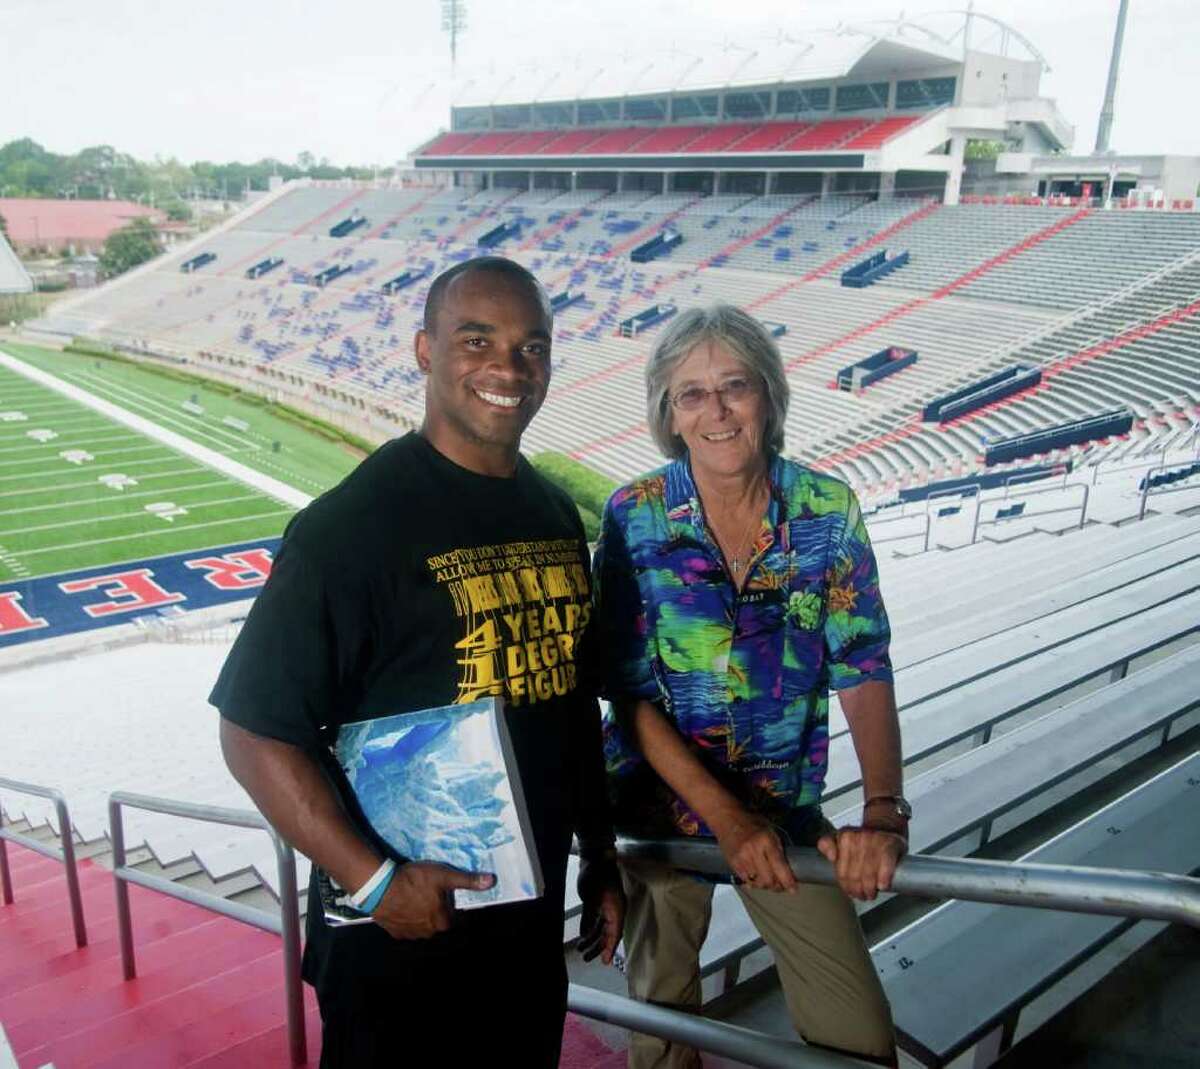 University of Mississippi football player Devin Thomas with geology instructor Cathy Grace at Vaught-Hemingway Stadium in Oxford, Miss. on Wednesday, August 17, 2011. Photo by Bruce Newman